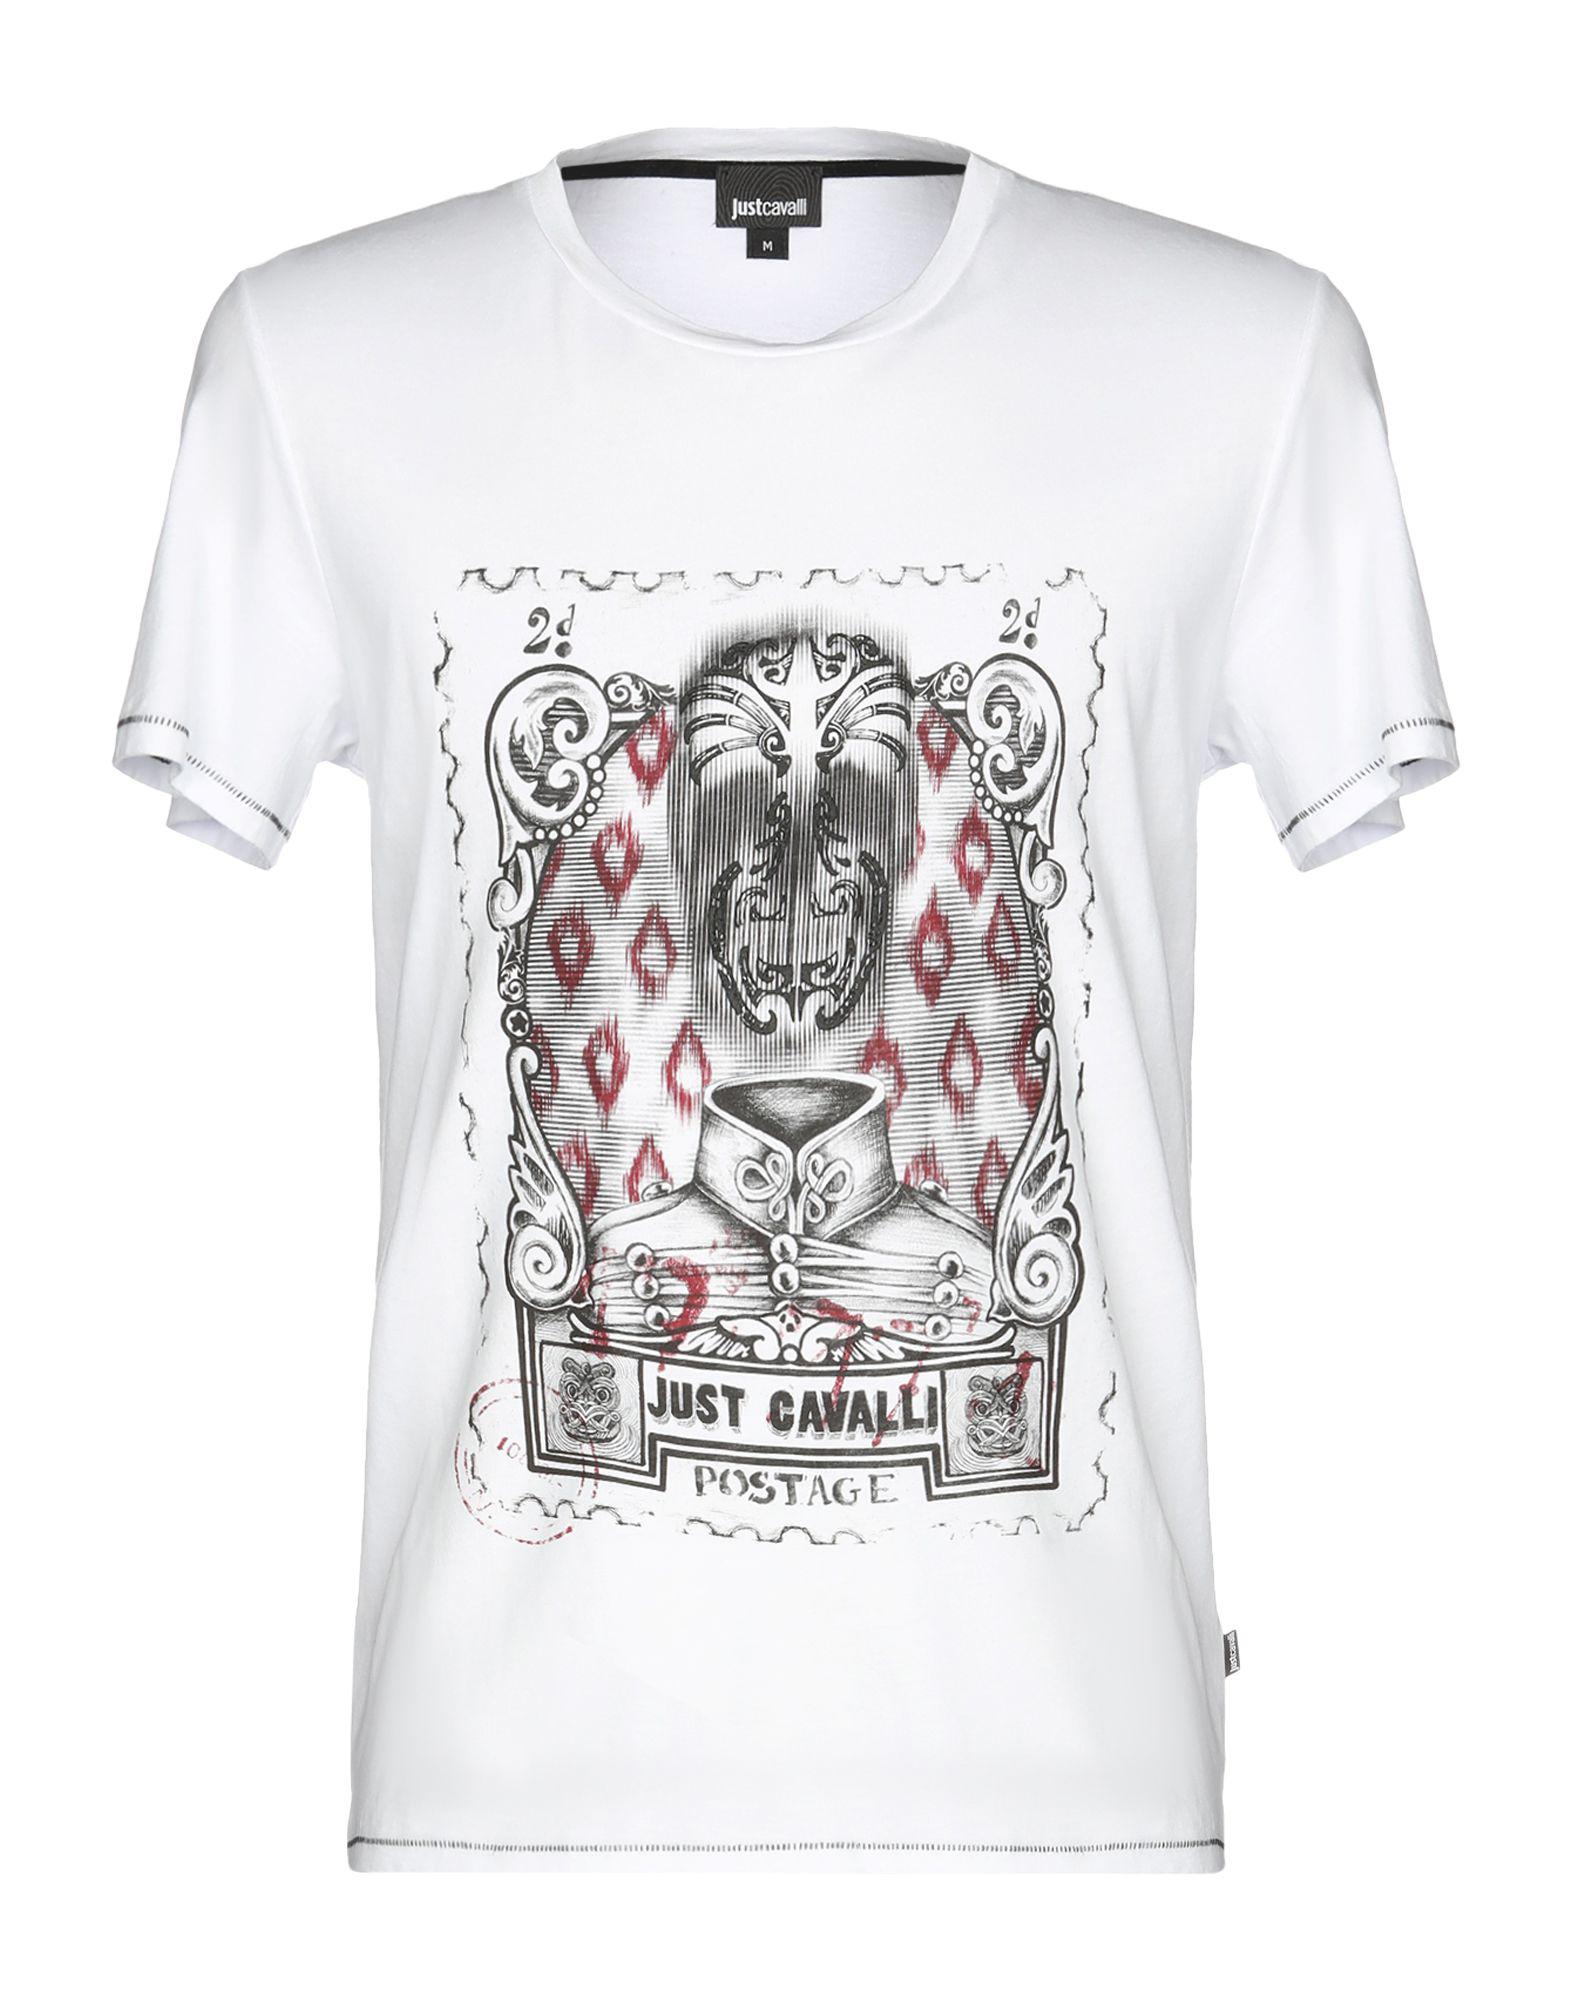 Just Cavalli Cotton T-shirt in White for Men - Lyst